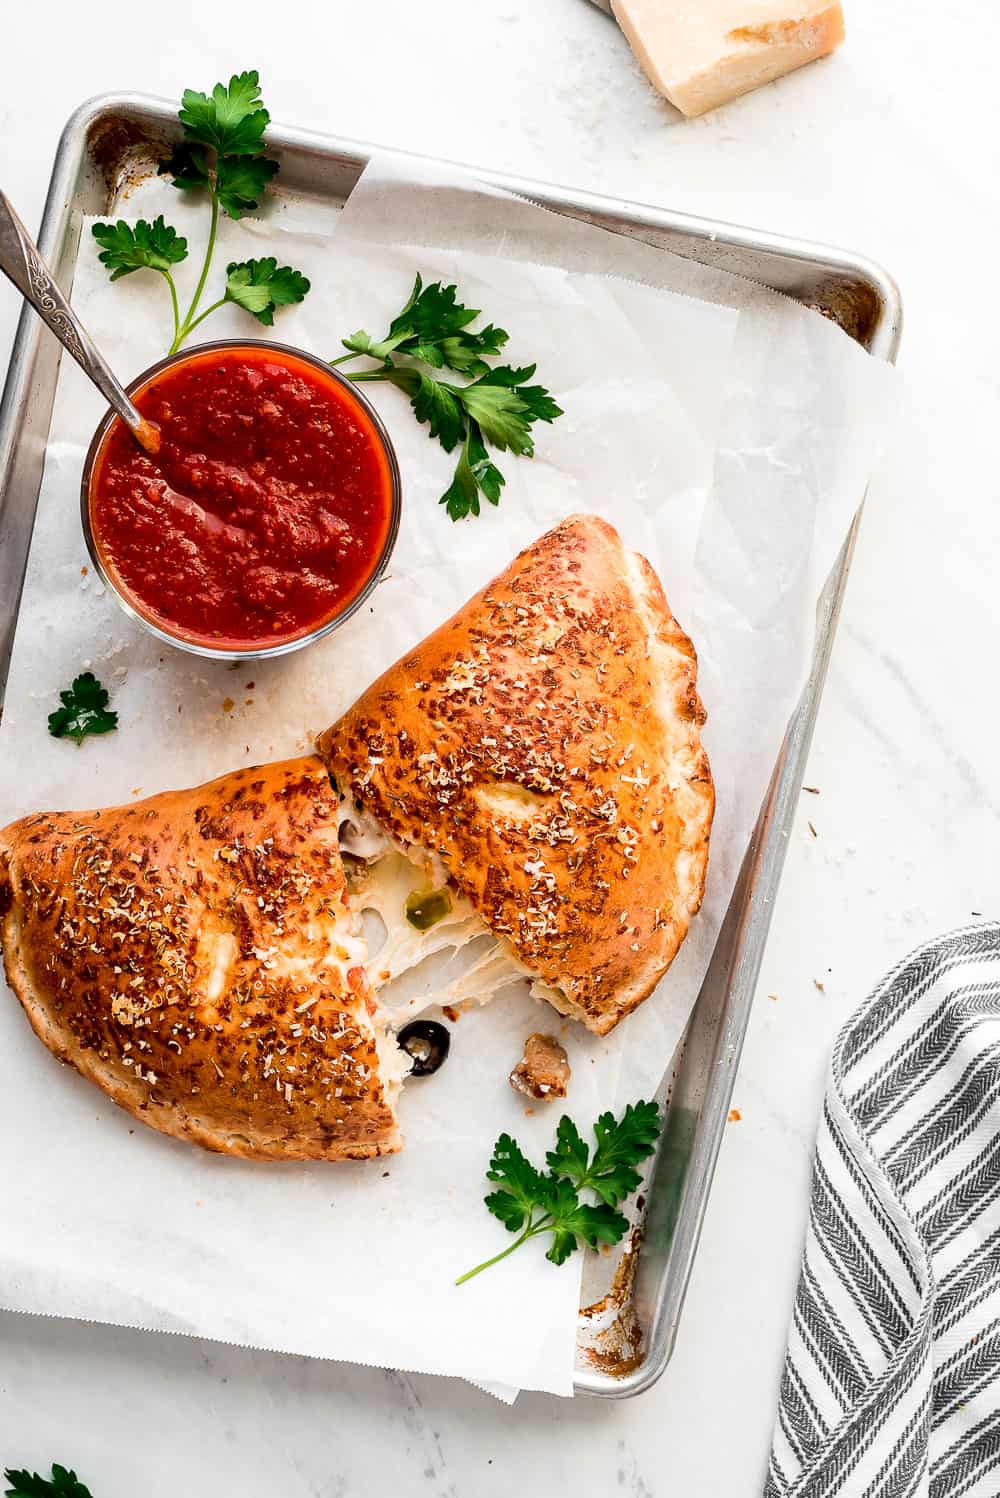 A Calzone cut in half on a baking sheet with a bowl of marinara sauce for dipping.